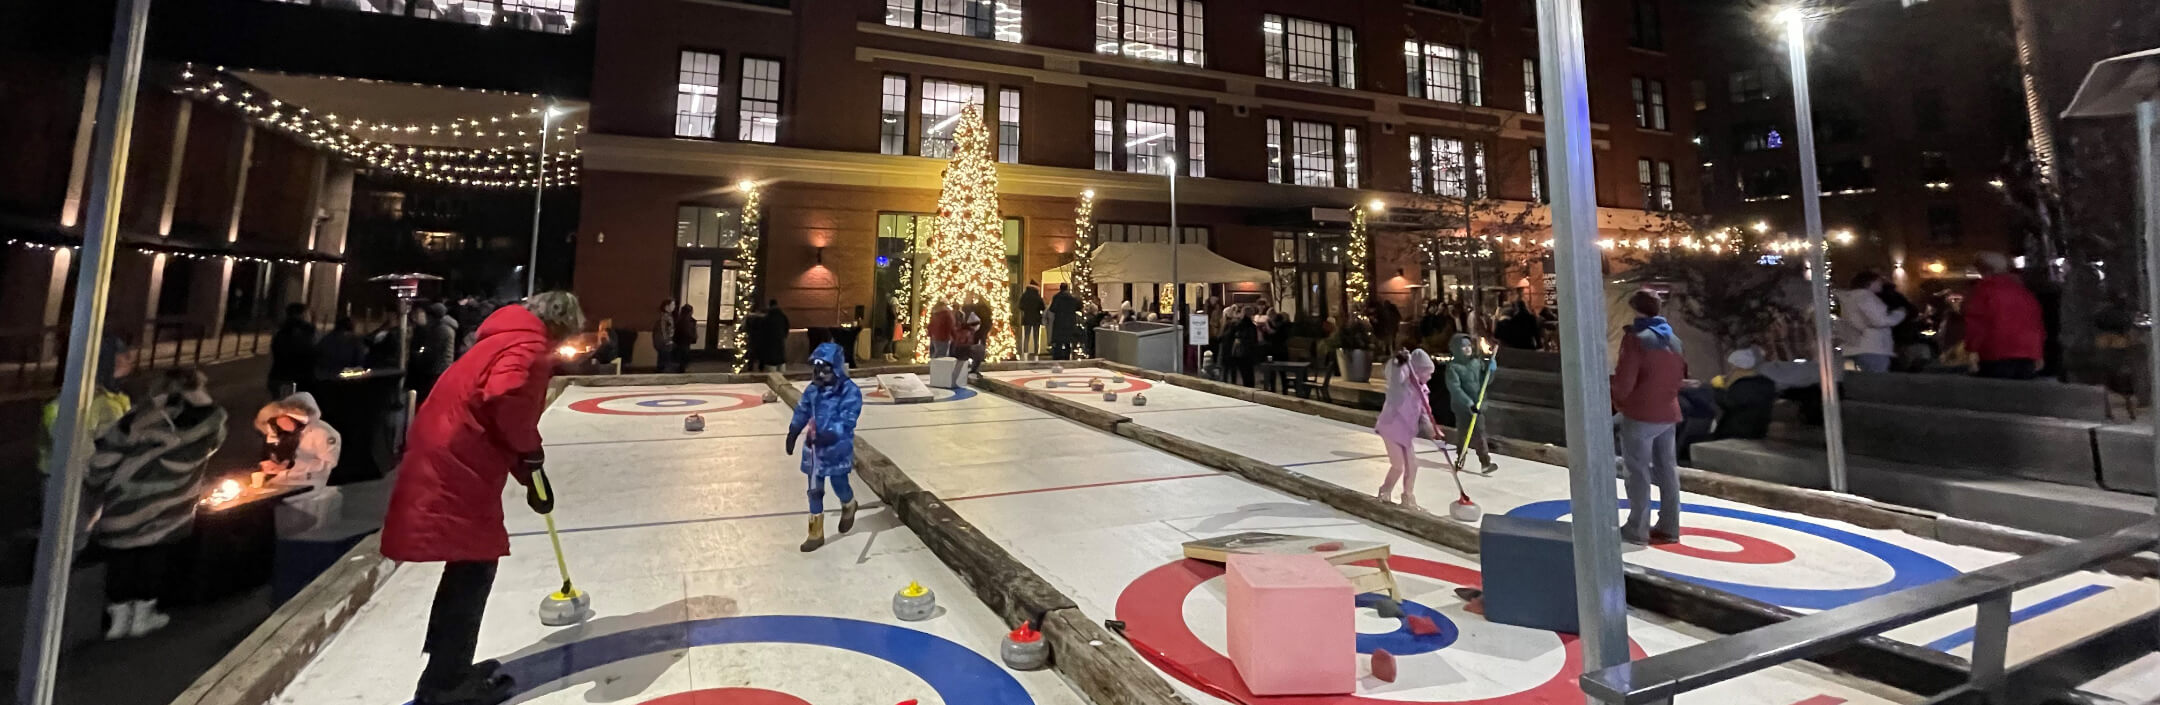 Curling at The Nordic